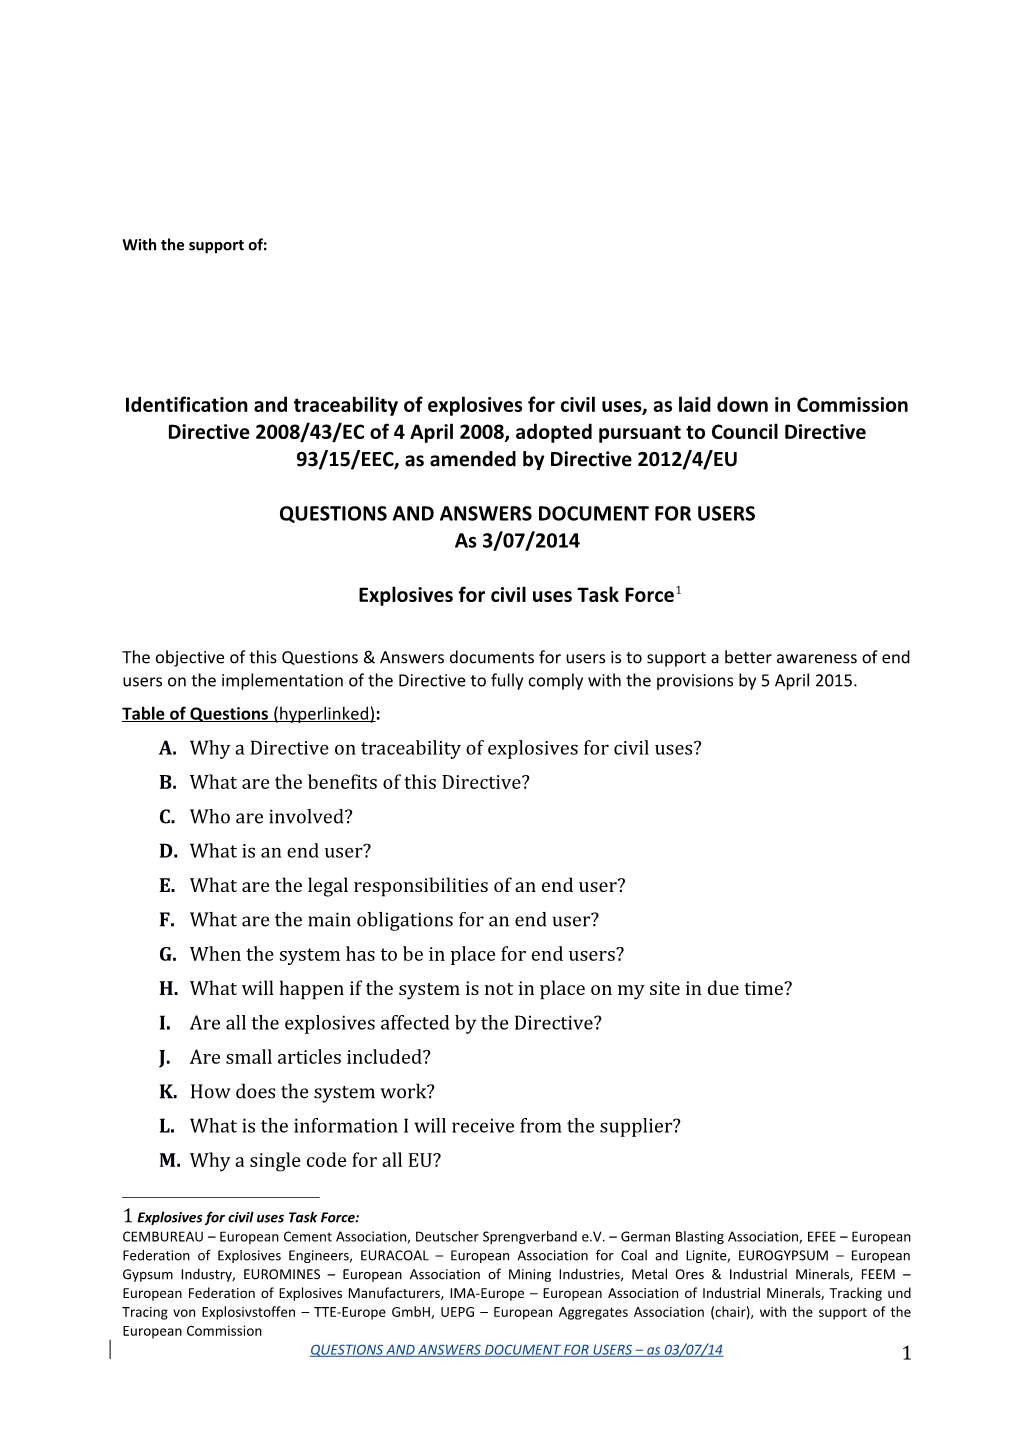 Questions and Answers Document for Users